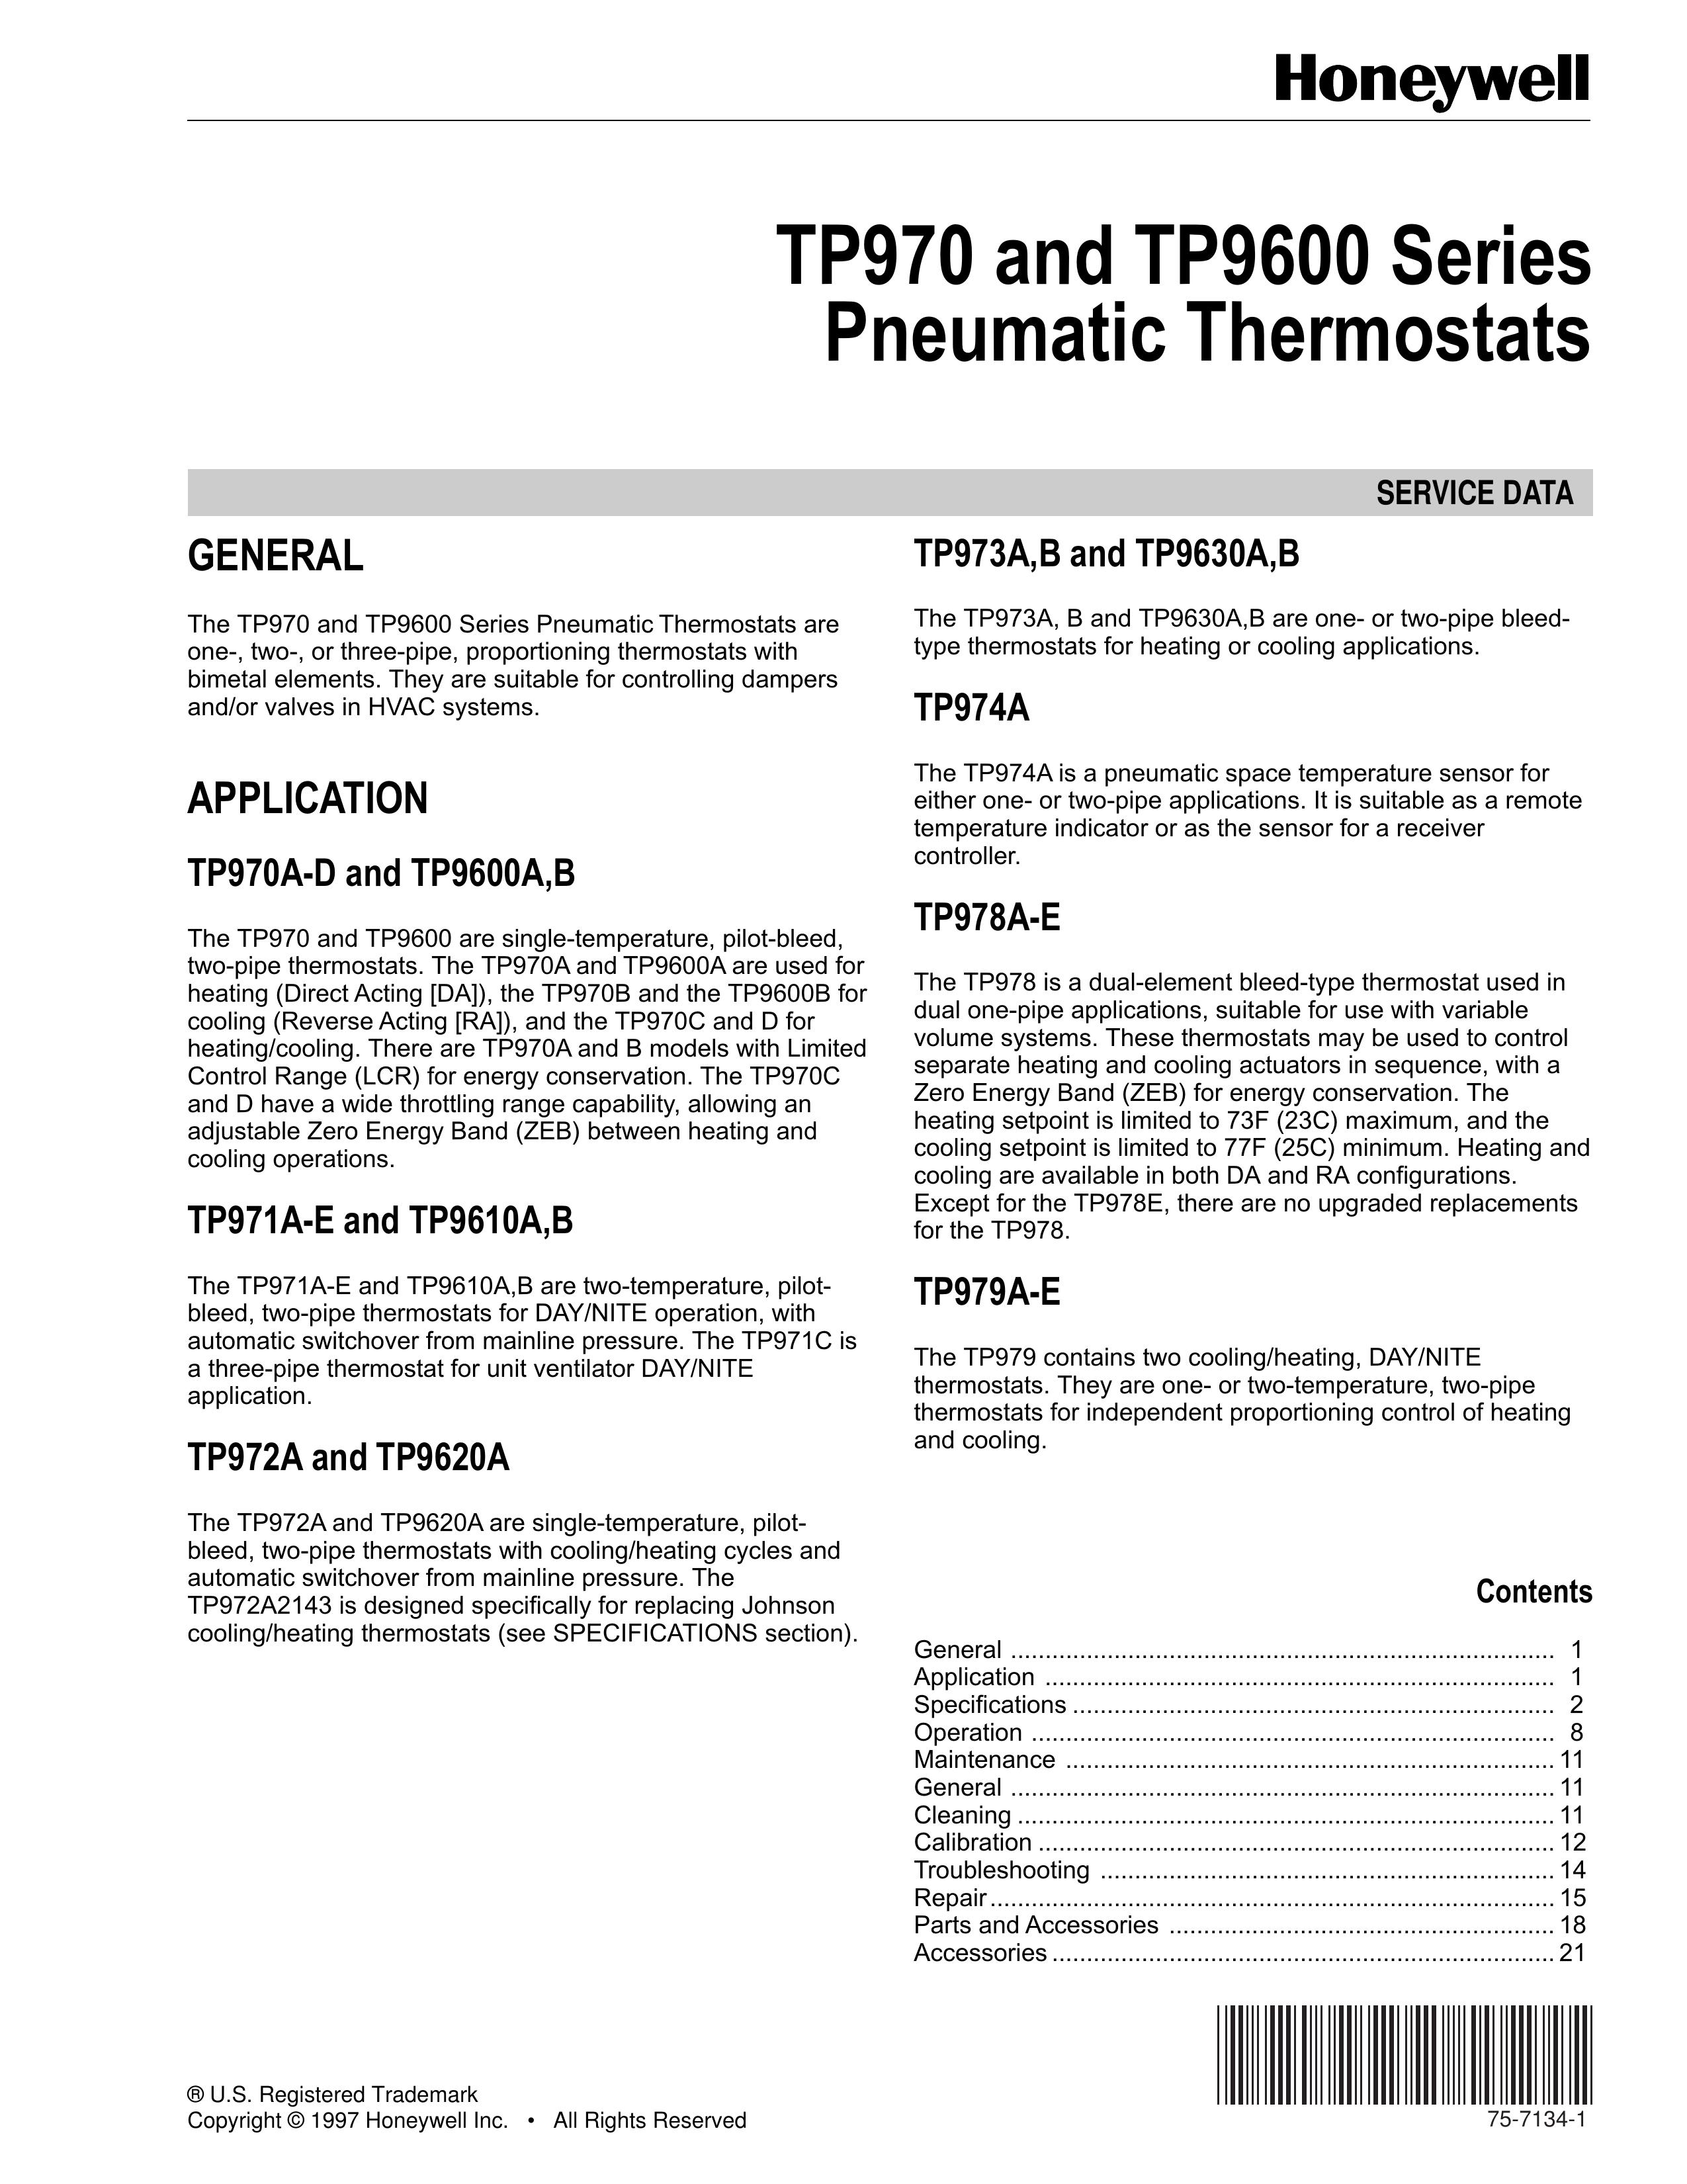 Honeywell TP978A-E Thermometer User Manual